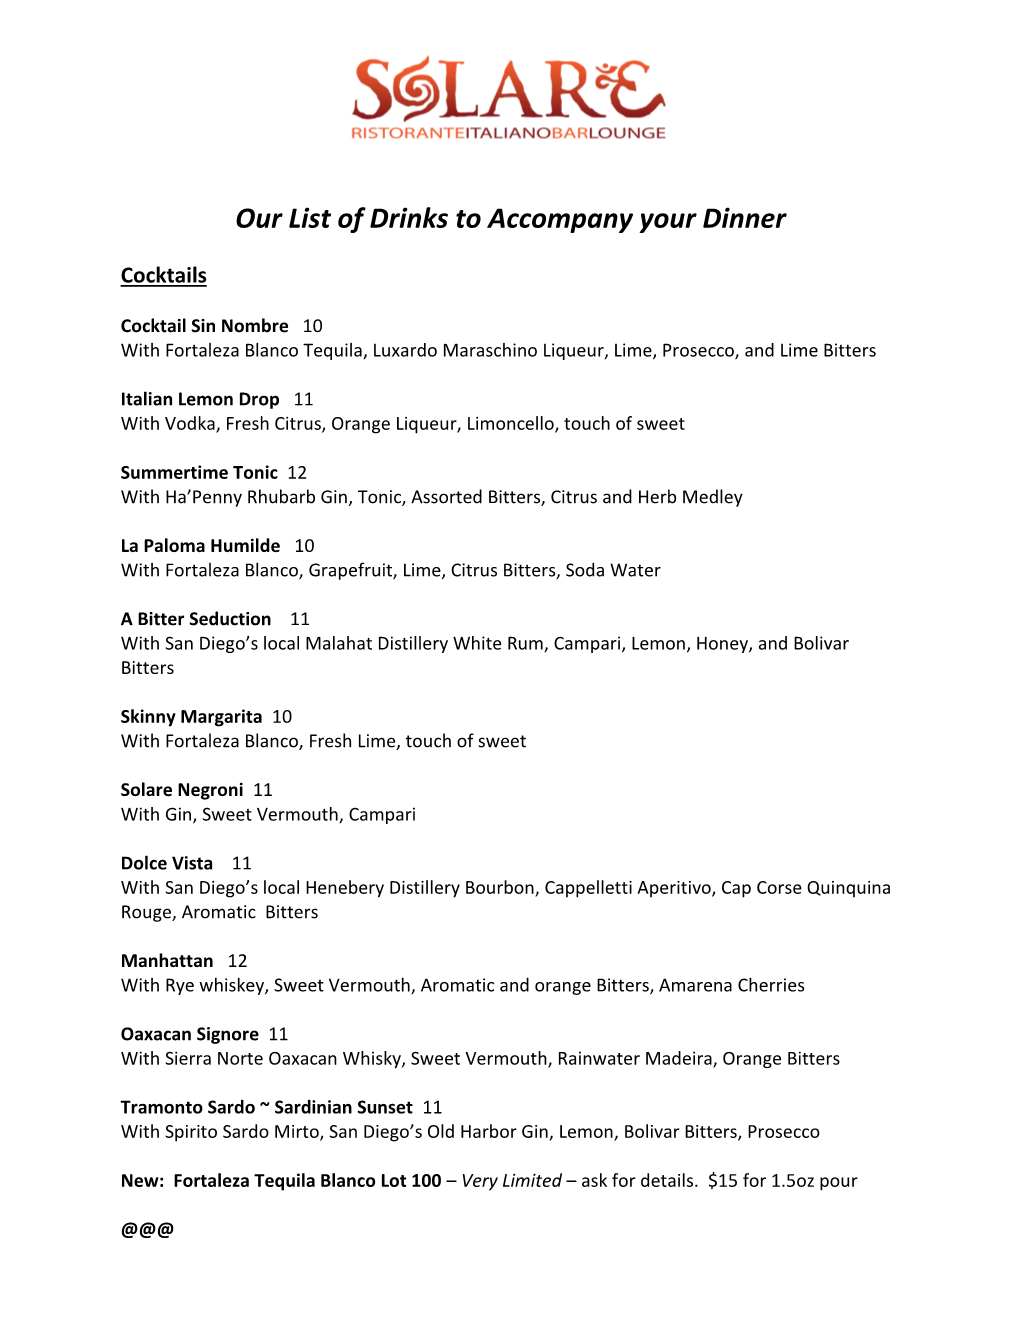 Our List of Drinks to Accompany Your Dinner